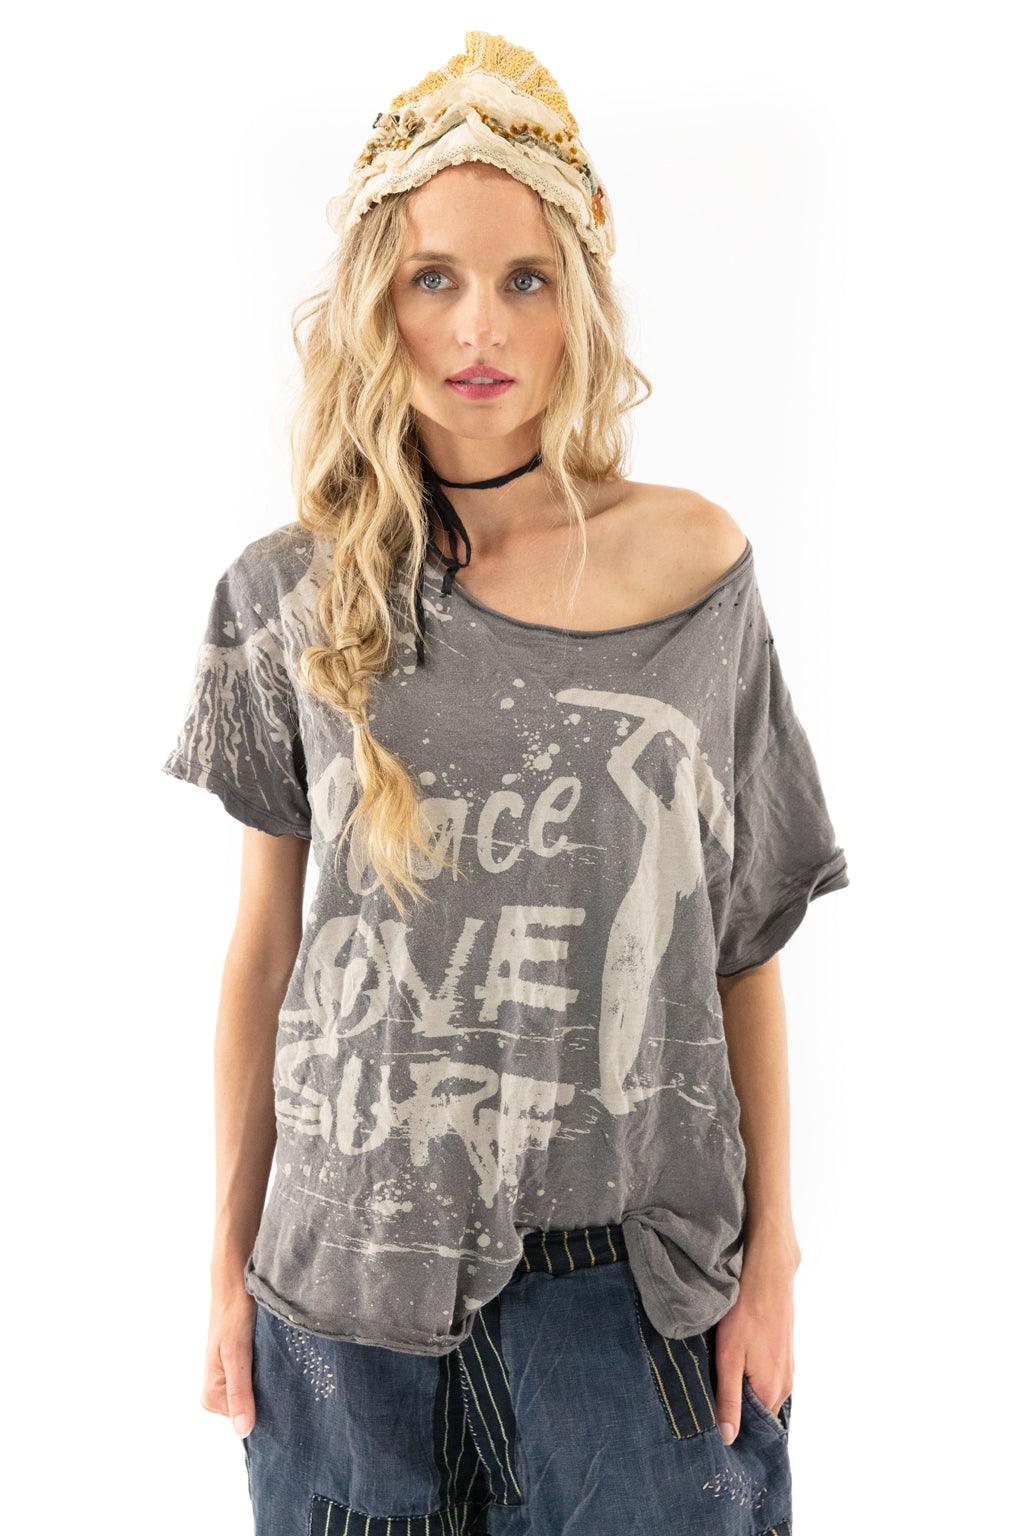 Peace, Love and Surf T - Magnolia Pearl Clothing